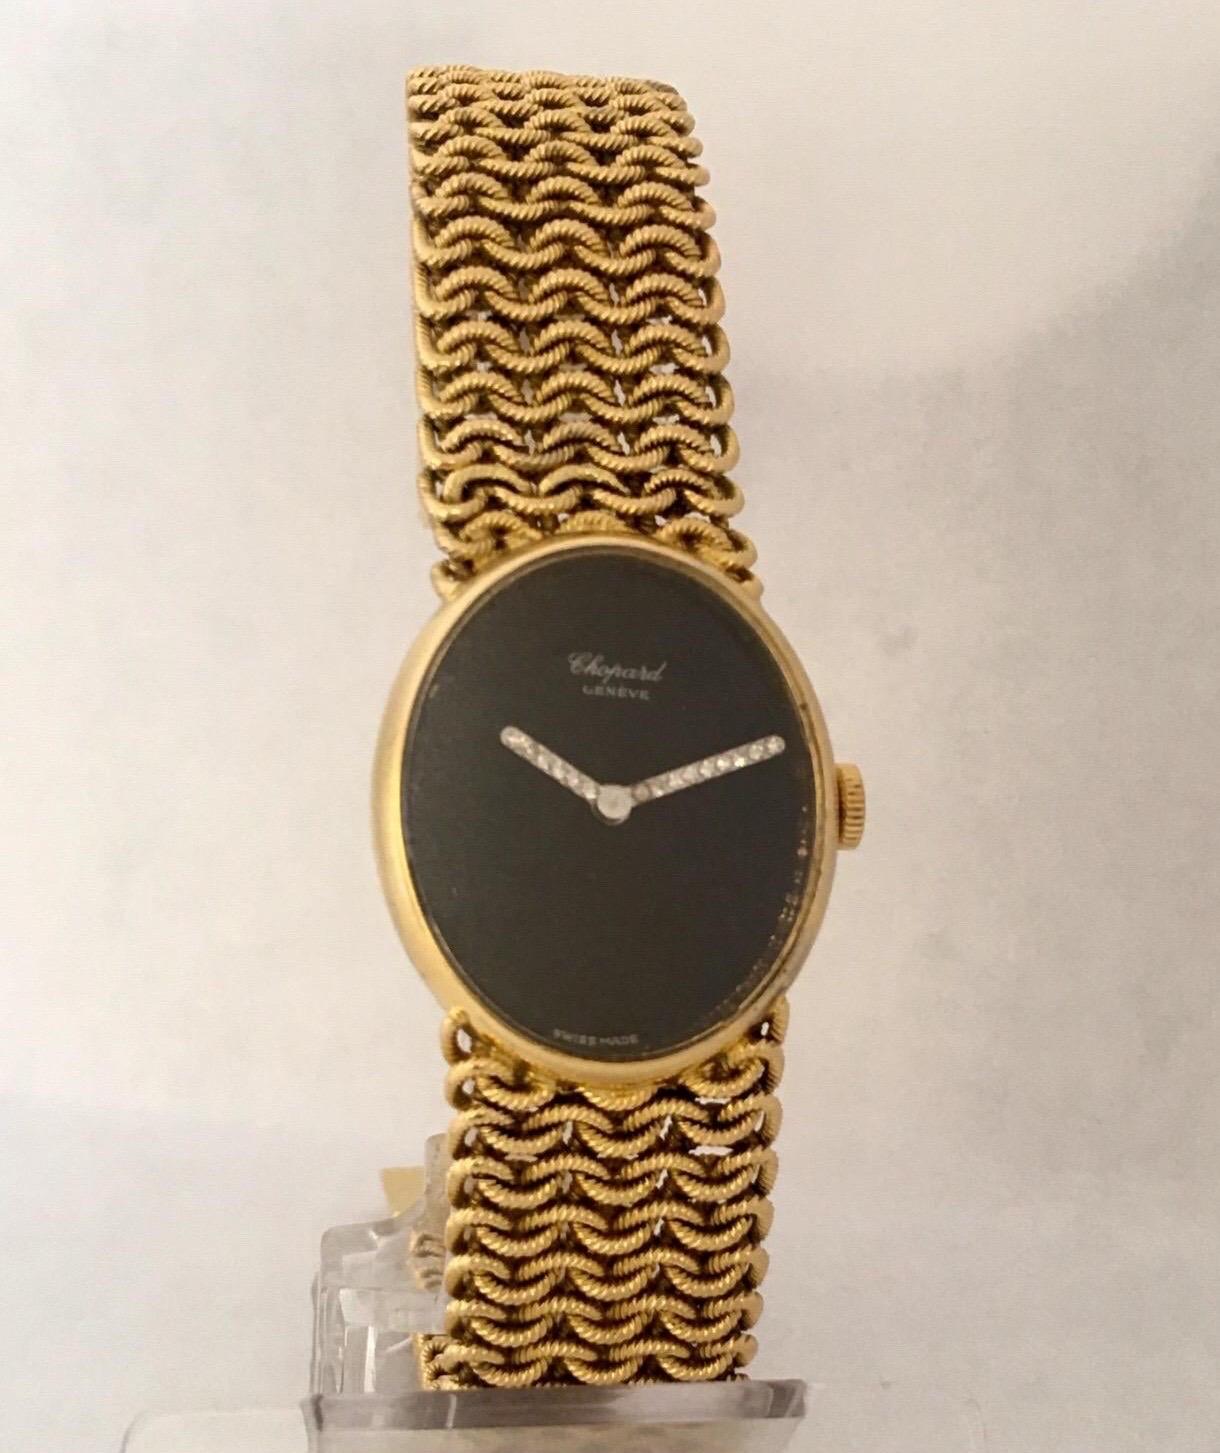 Presenting this exquisitely made ladies diamond and gold cocktail watch from the 1960s
Featuring a remarkably gorgeous and detailed lattice 18k yellow gold bracelet; it’s white diamond hands and black dial face truly a masterpiece in its own right